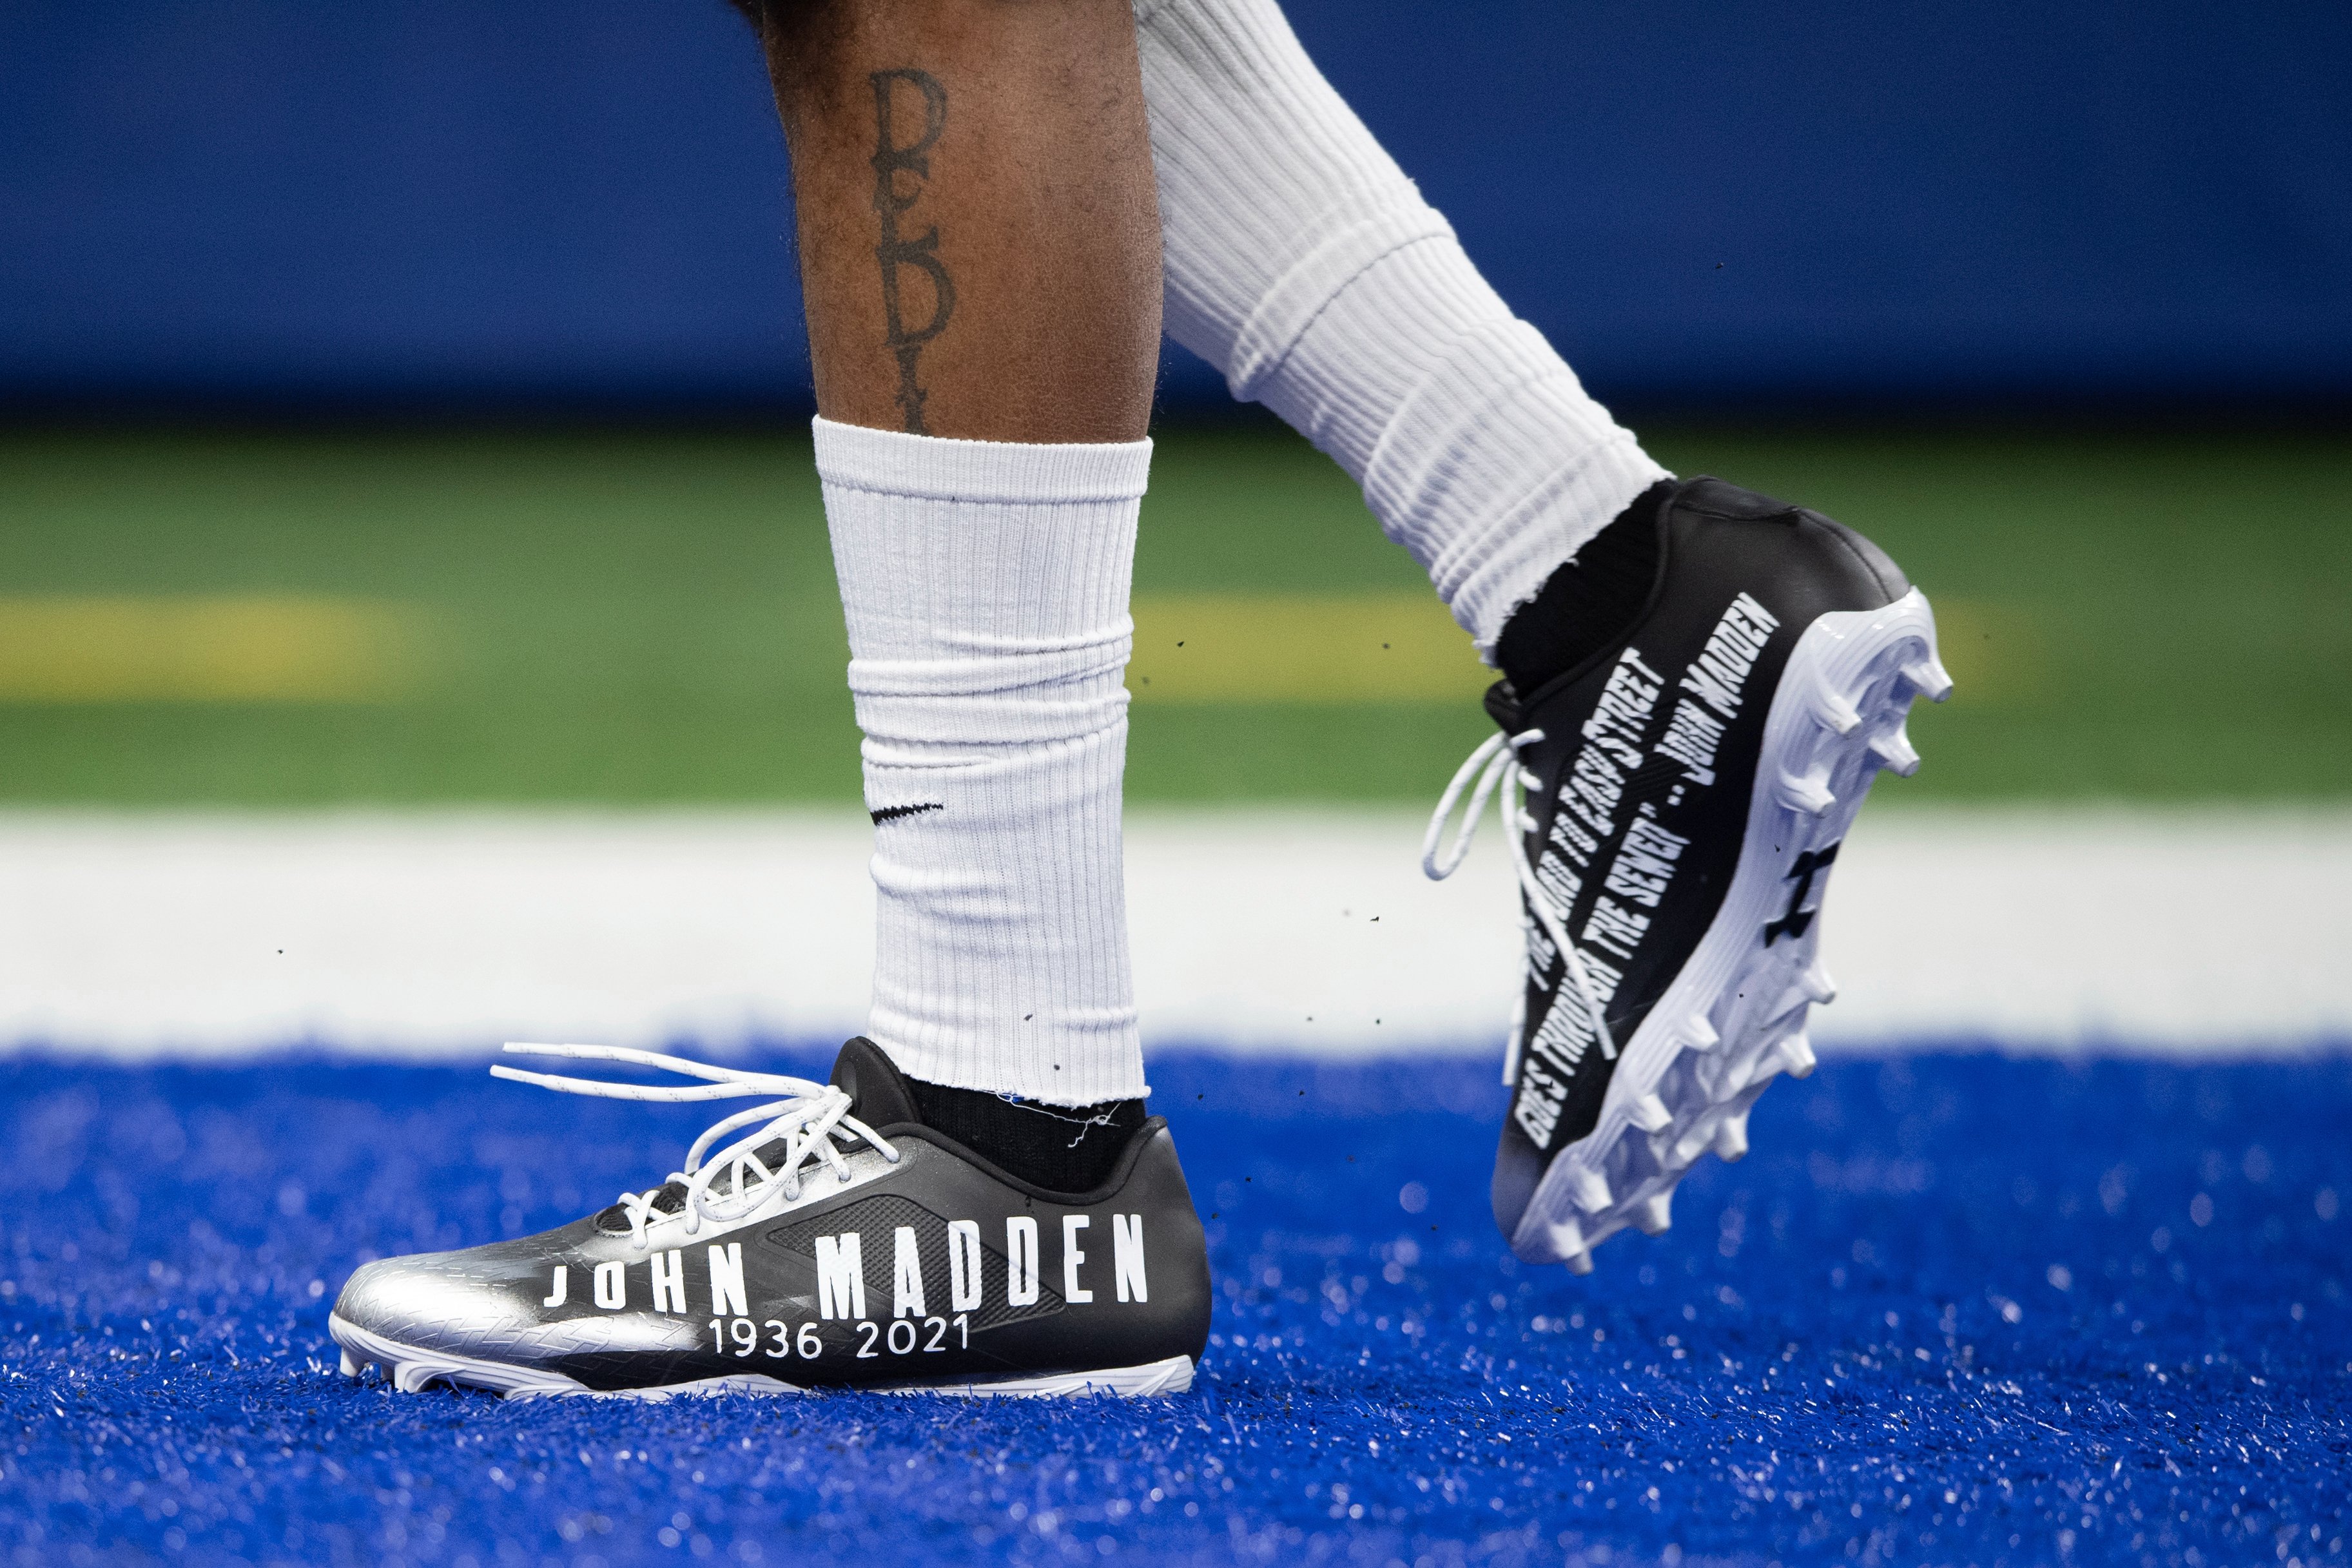 bang sædvanligt Phobia NFL on X: ".@stefondiggs &amp; @DeSeanJackson10 are honoring John Madden  with their cleats today. 🙏🕊️ https://t.co/uc6Ba8o4mg" / X